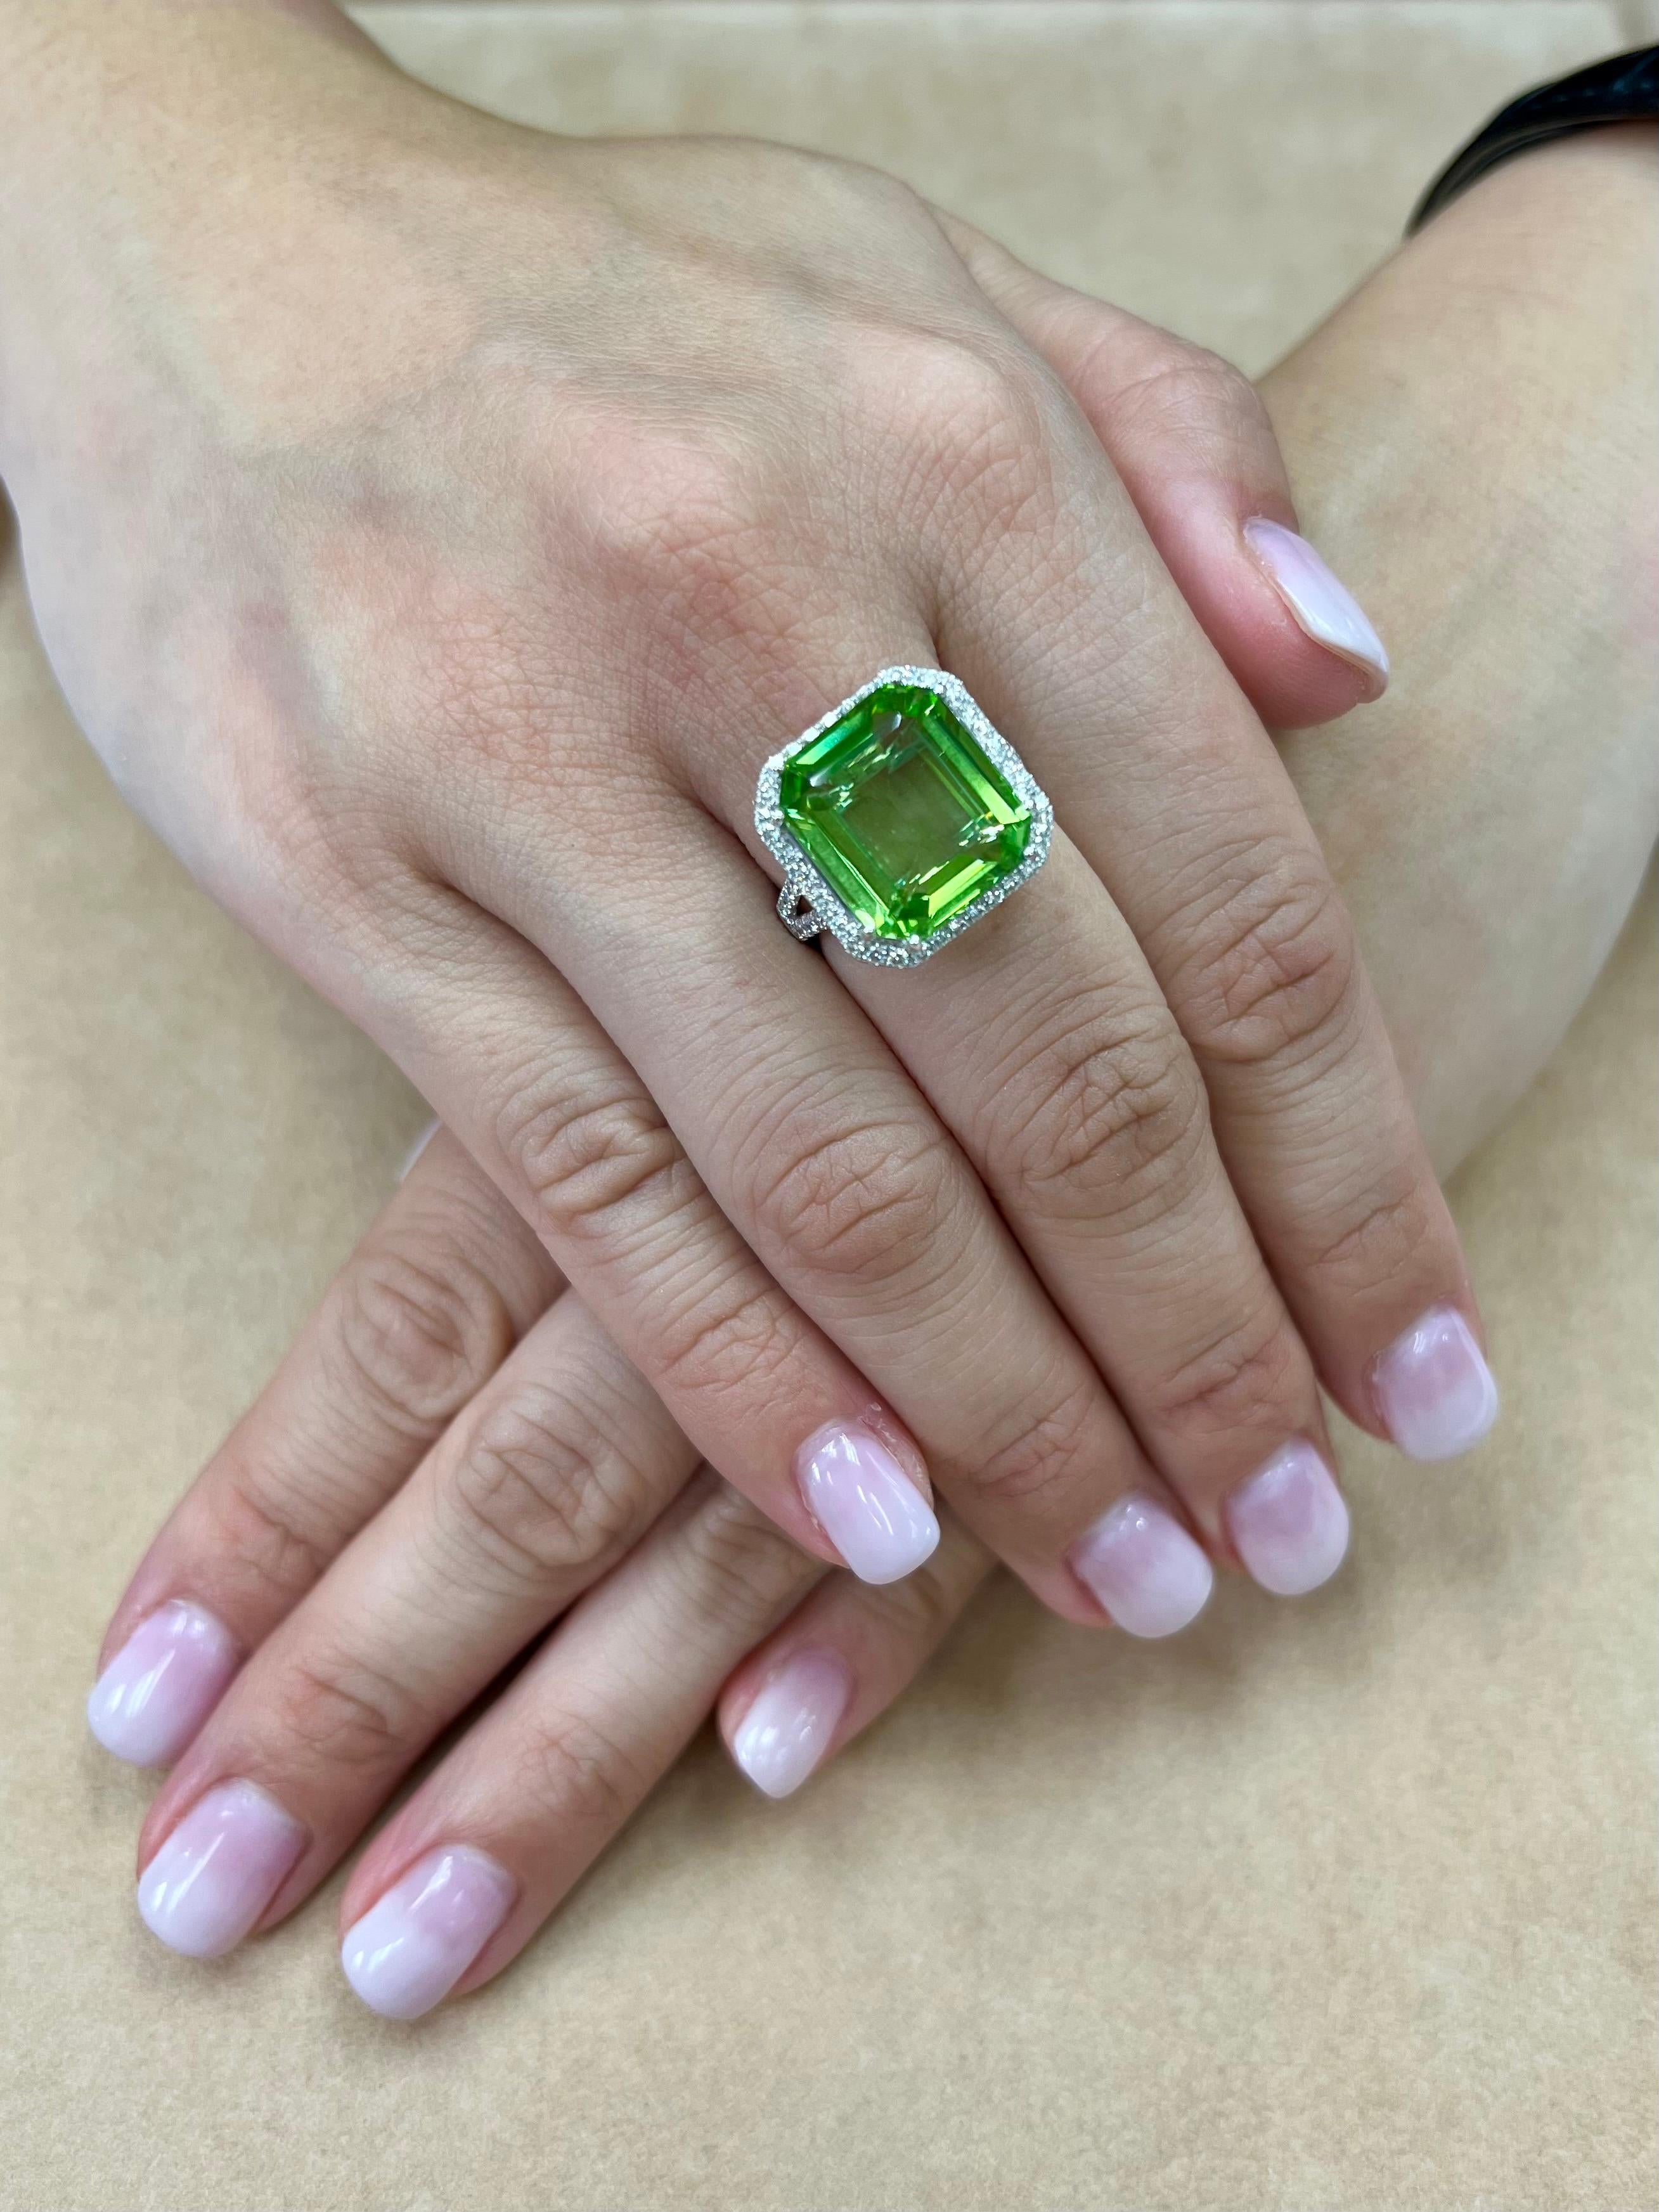 Please check out the HD video and photos of the ring in outdoor / natural lighting! This is a statement piece straight from the source (Burma, no heat) The natural Peridot is certified by GIA. It is not treated or enhanced in any way. The ring is